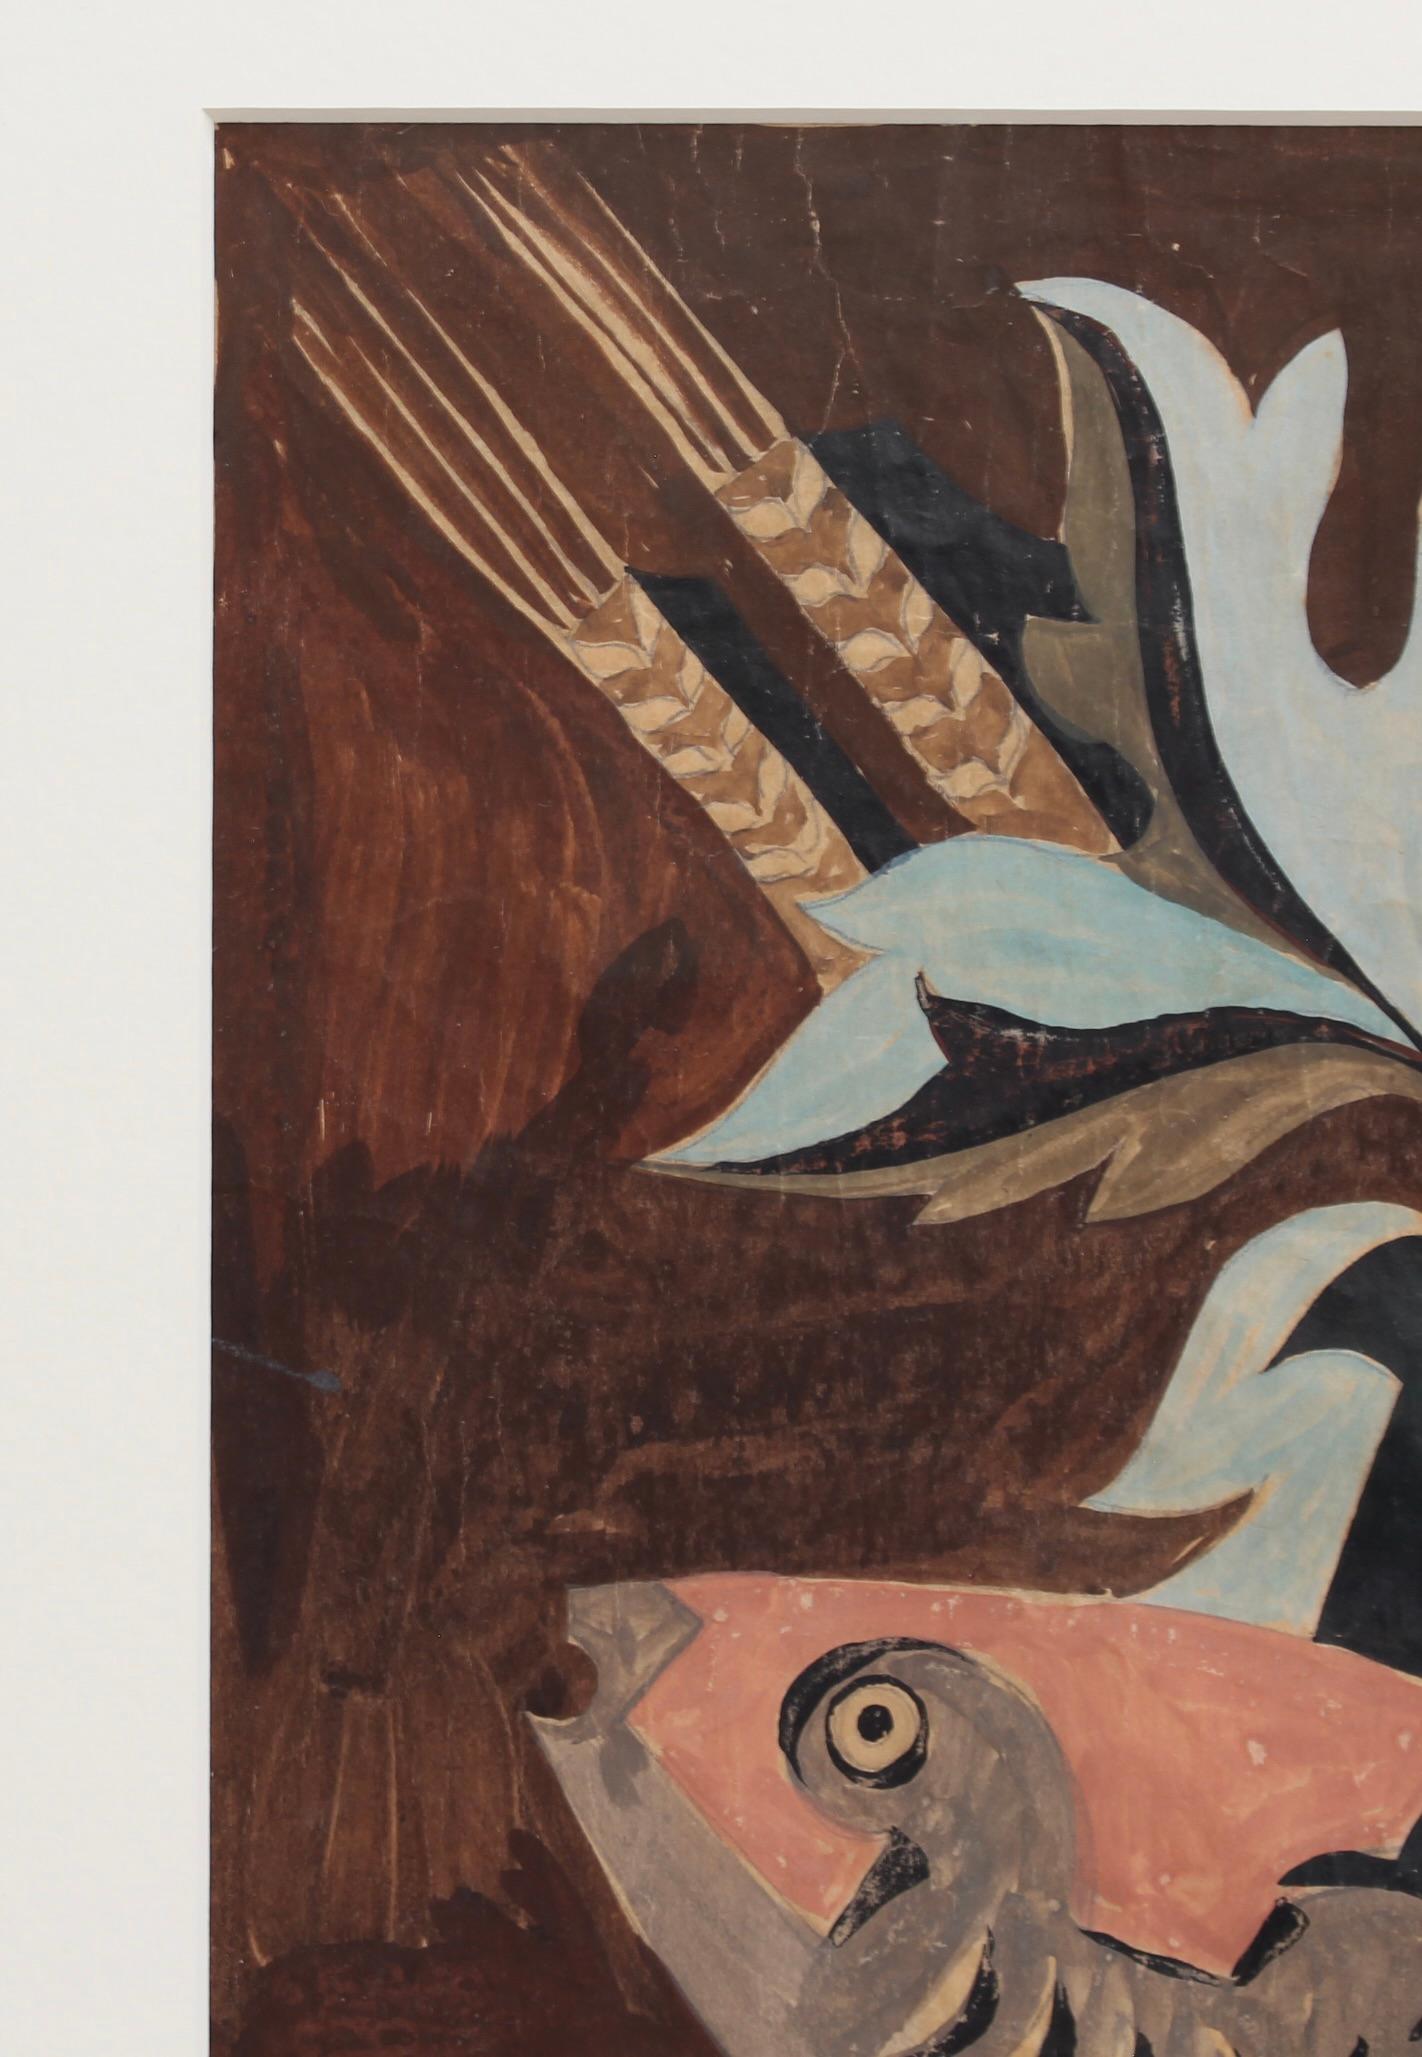 'Fish, Dove and Musical Instrument', gouache on paper, from the Italian School of artists (circa 1940s). Surely this very attractive piece was inspired by Georges Braque (1882-1963) and Juan Gris' (1887-1927) cubist style, not to forget the clear